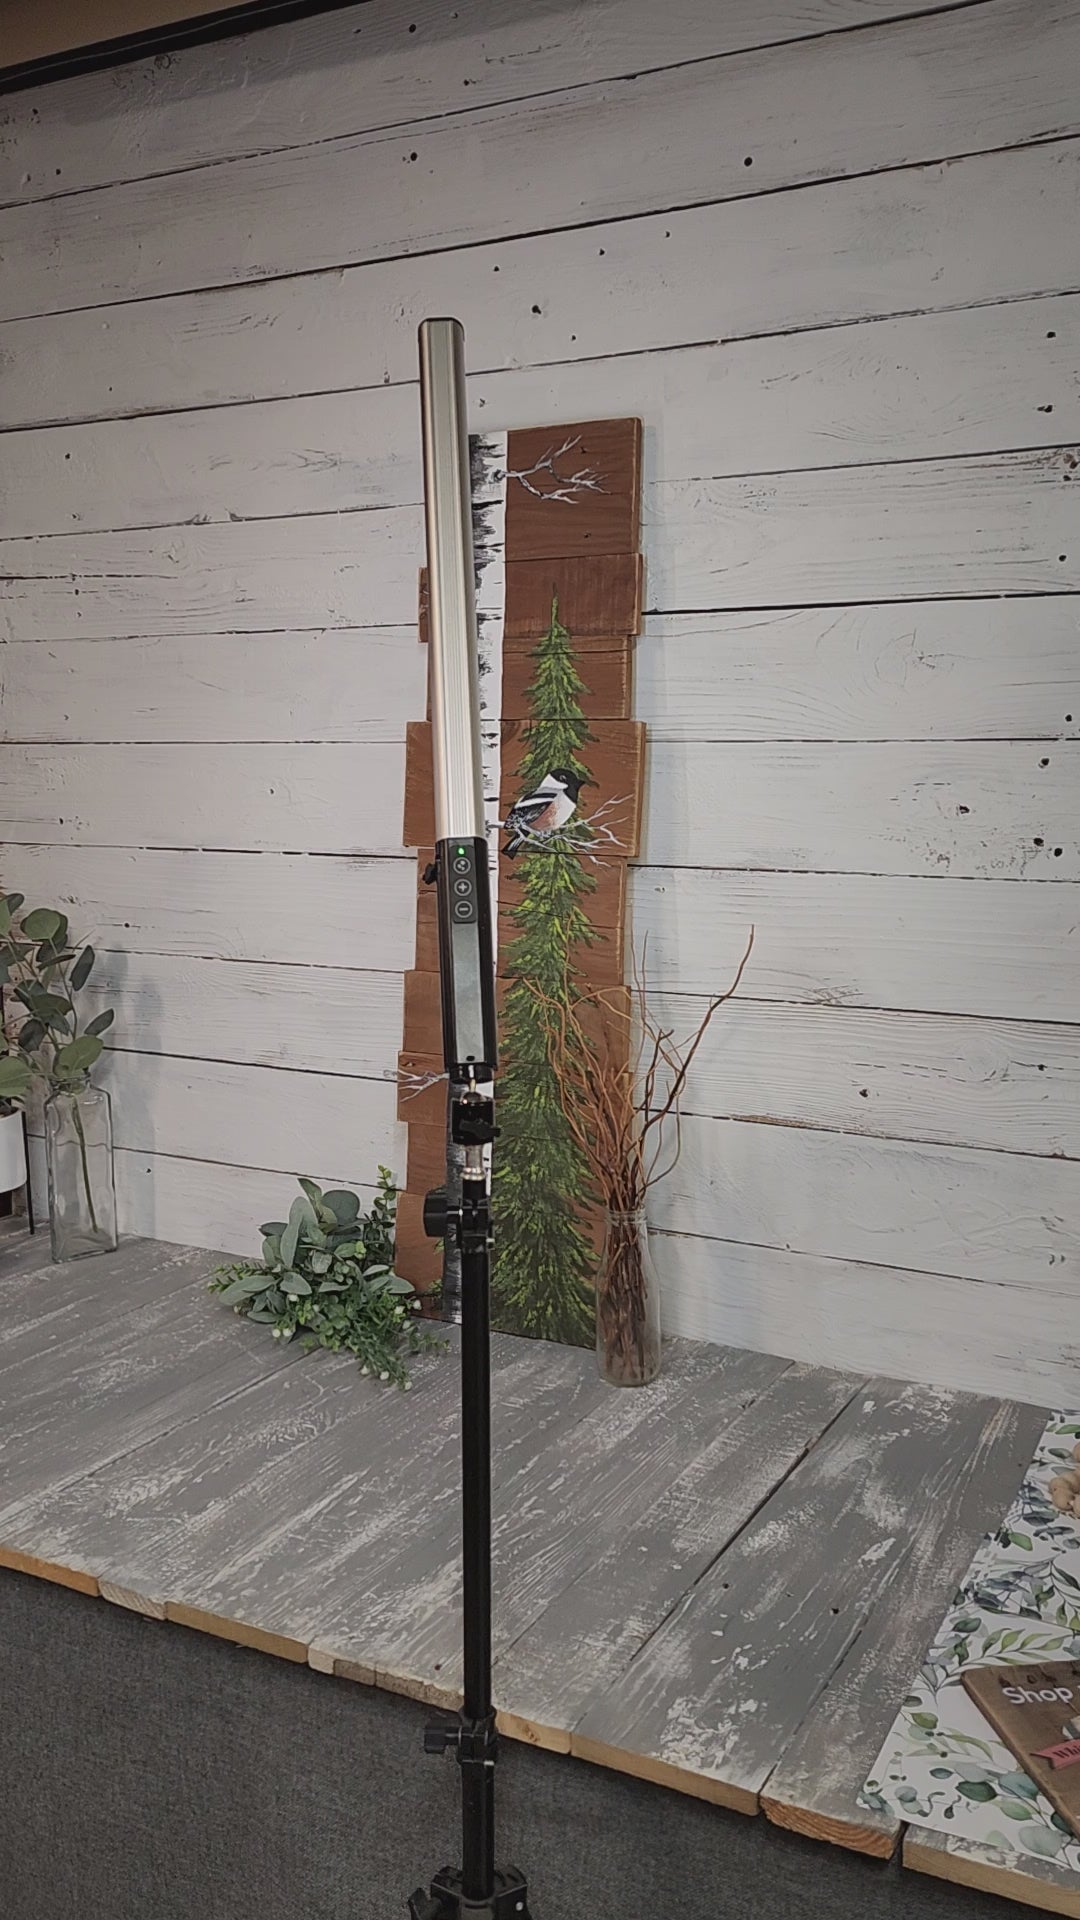 Tall White Birch and Pine tree, hand painted chickadee, Rustic cabin decor pallet art